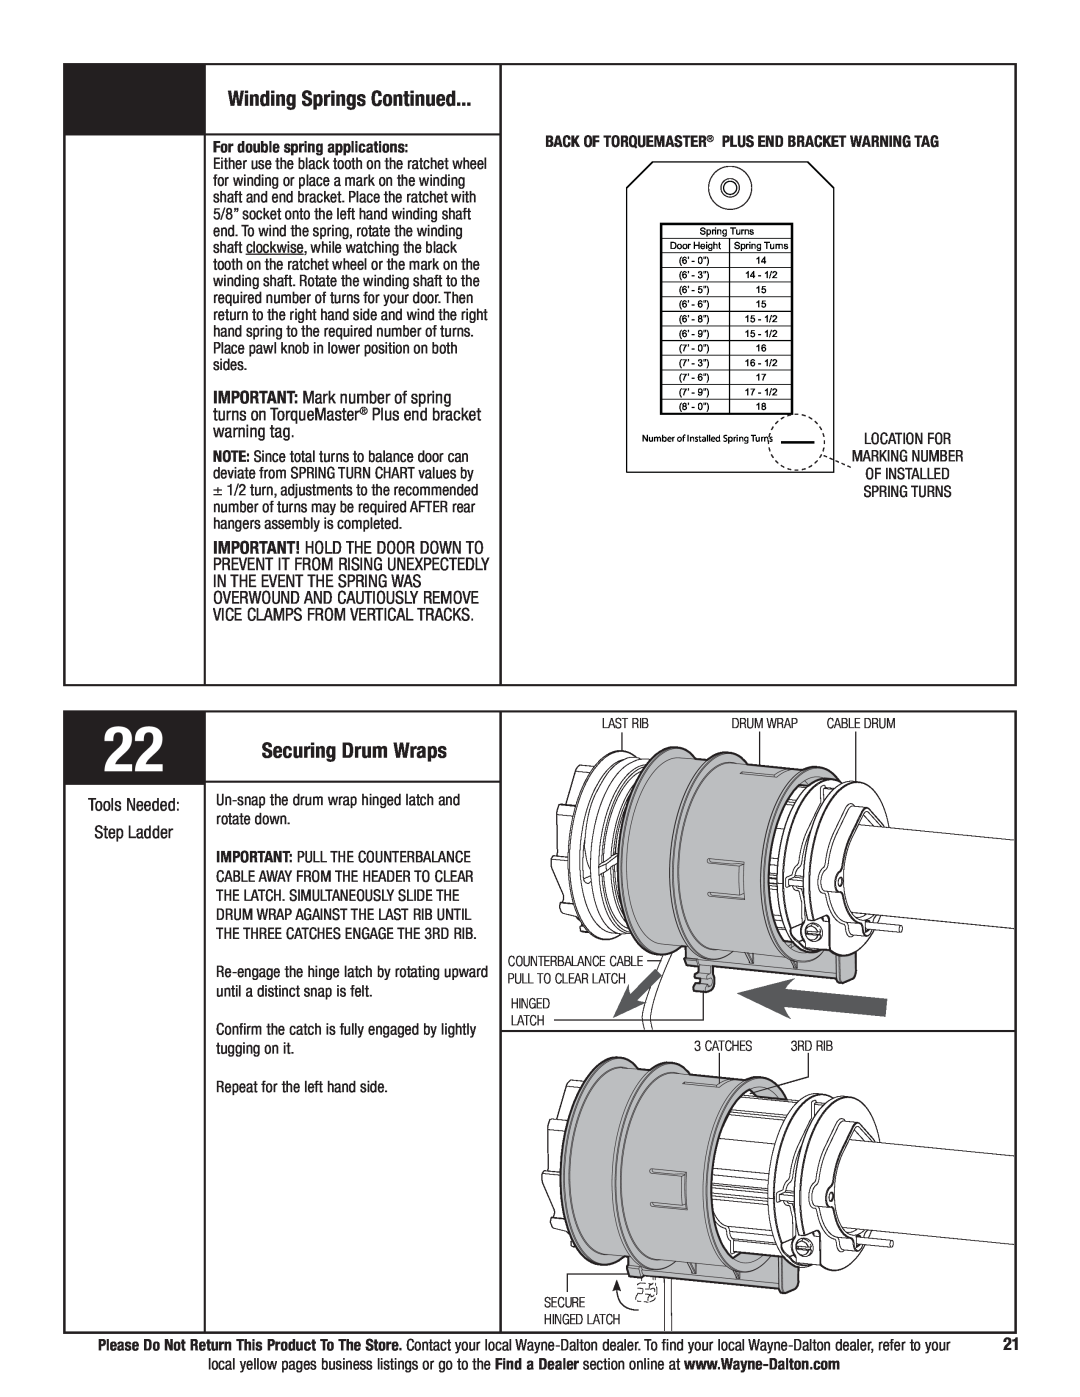 Wayne-Dalton 9700 Winding Springs Continued, Securing Drum Wraps, Tools Needed, IMPORTANT Mark number of spring 